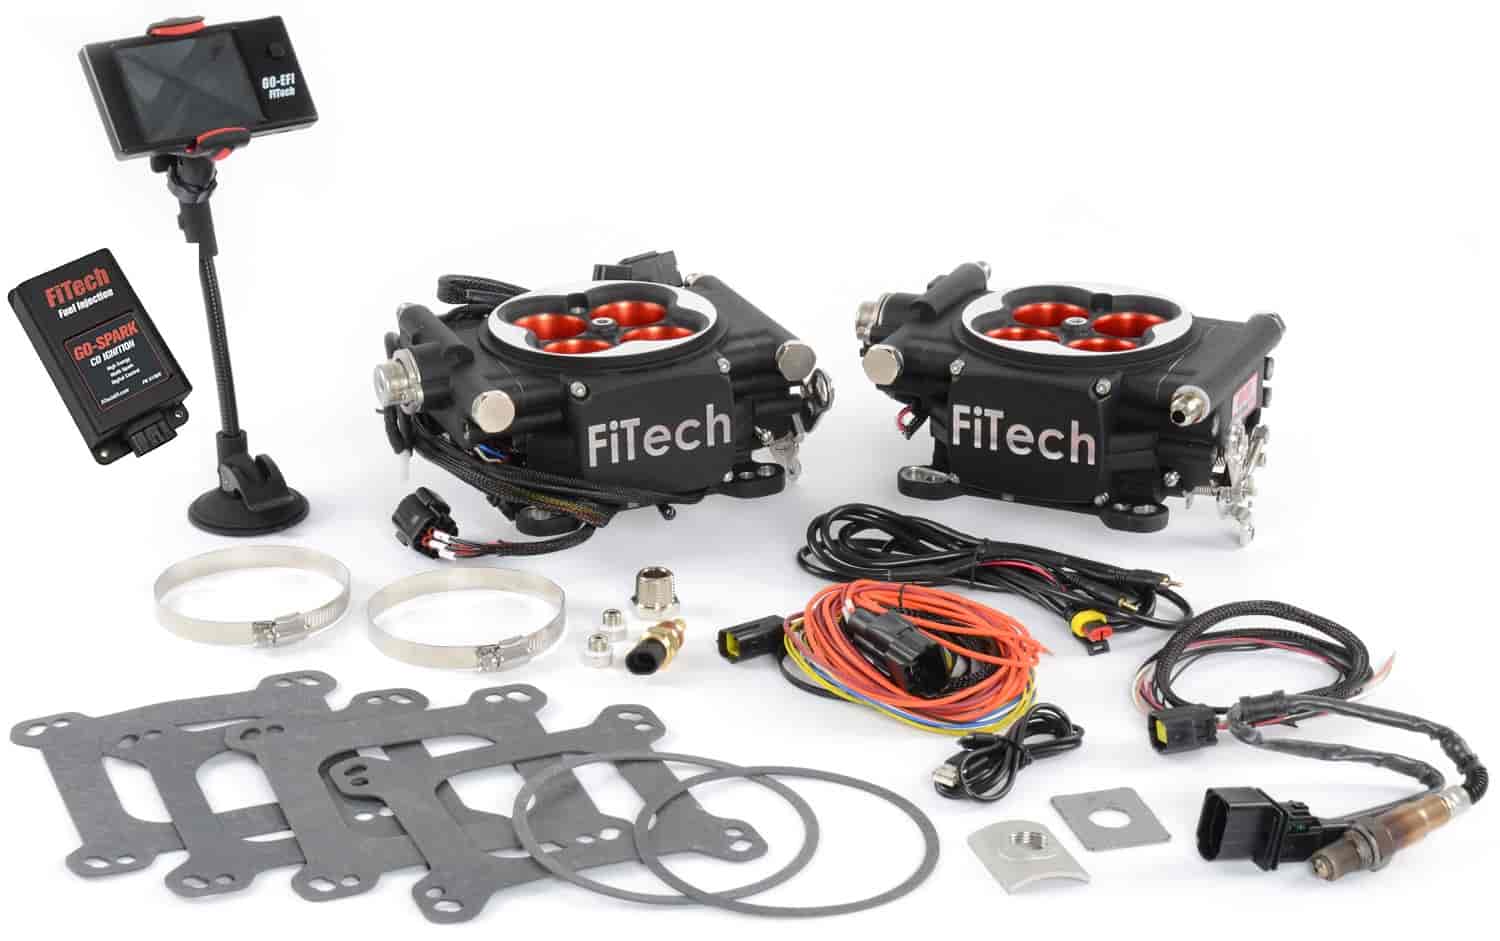 Go EFI 2x4 625 HP Dual Quad Throttle Body Fuel Injection Master Kit [with CDI Box] Matte Black